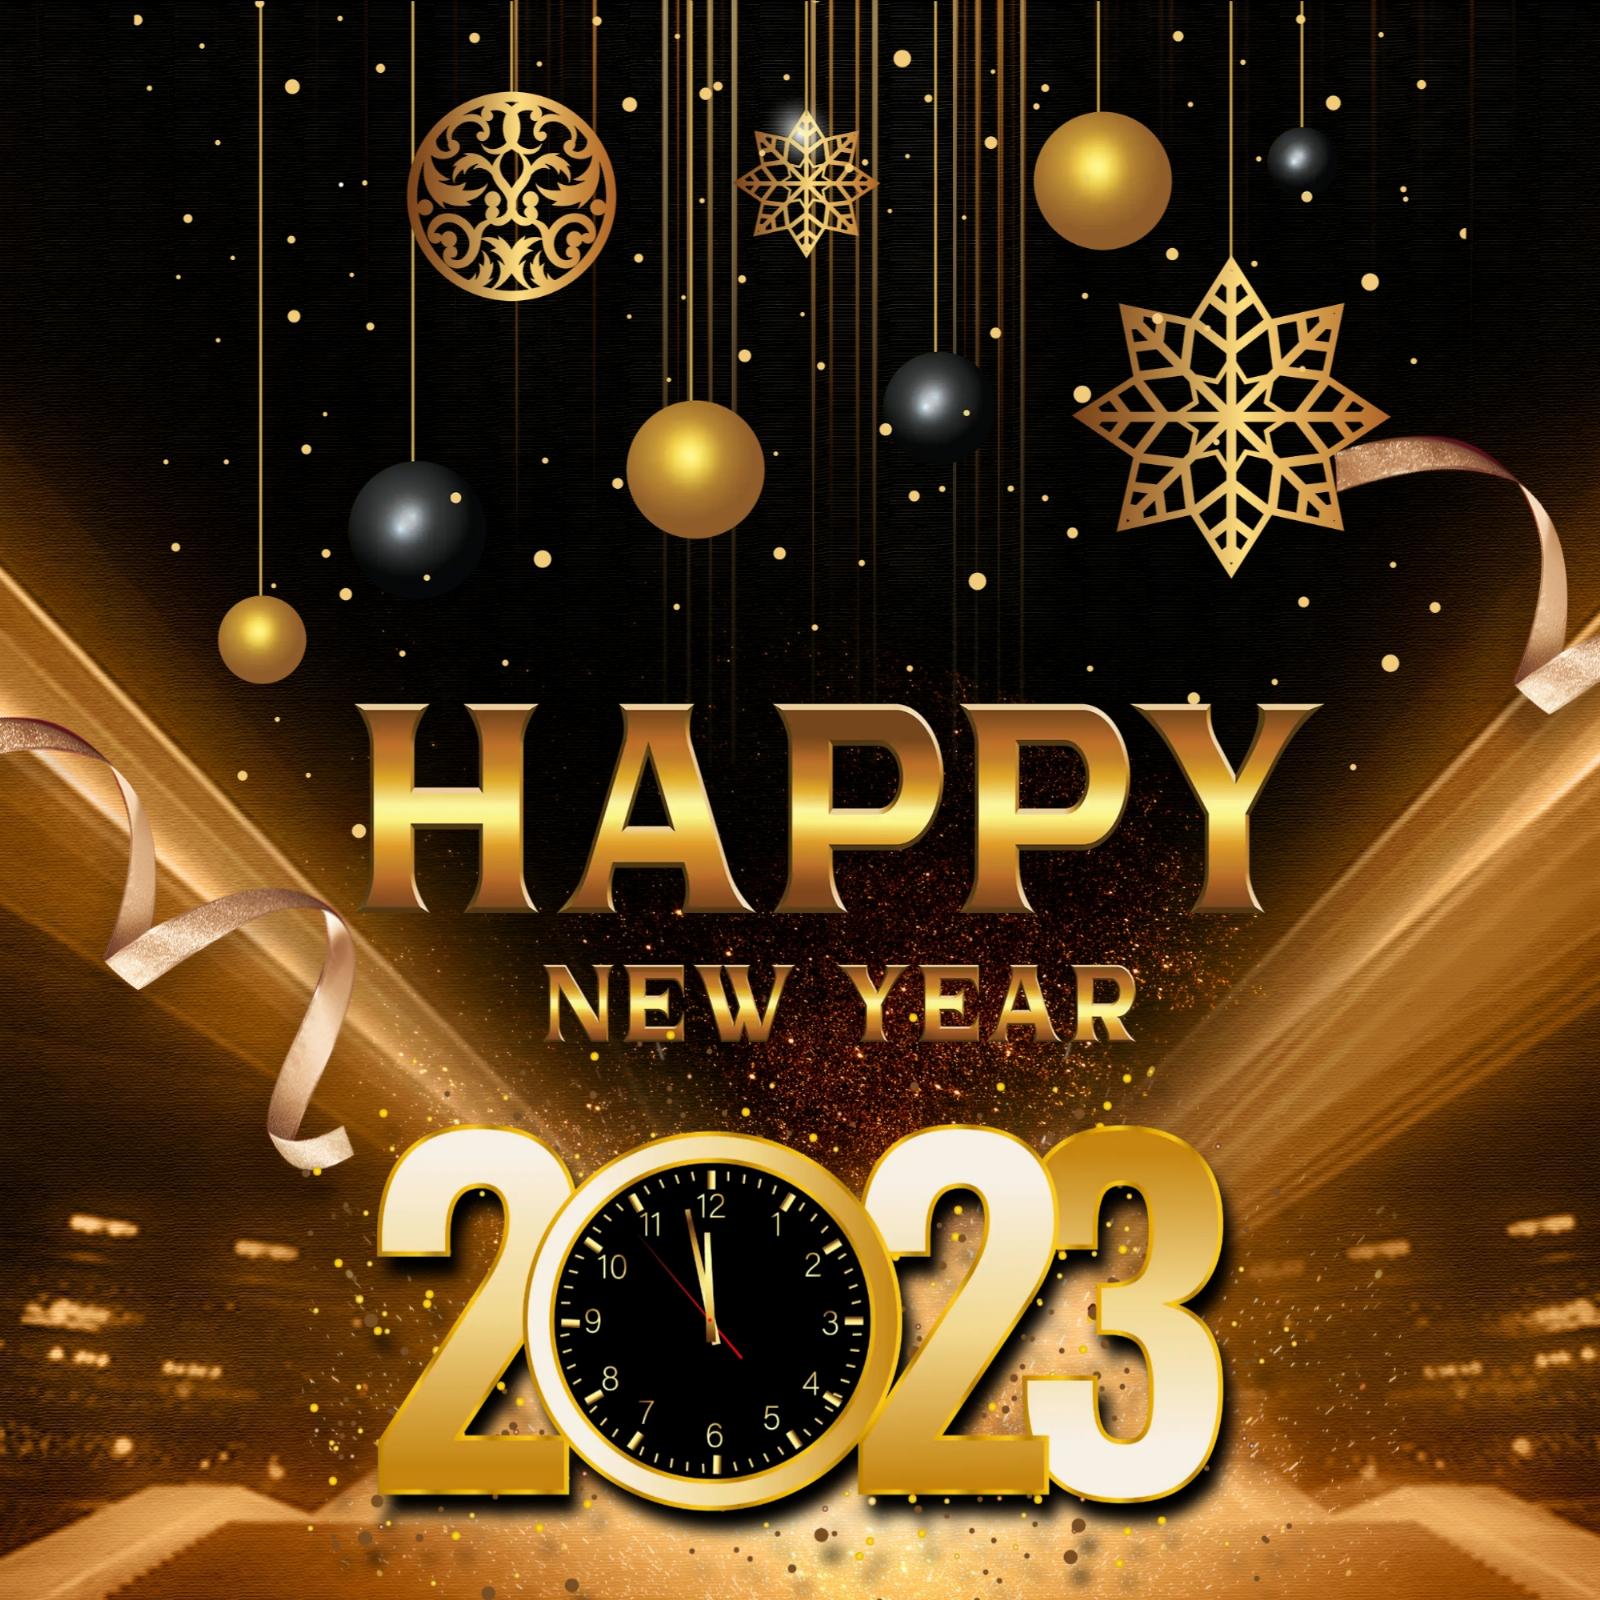 Free Happy New Year 2023 Images Download